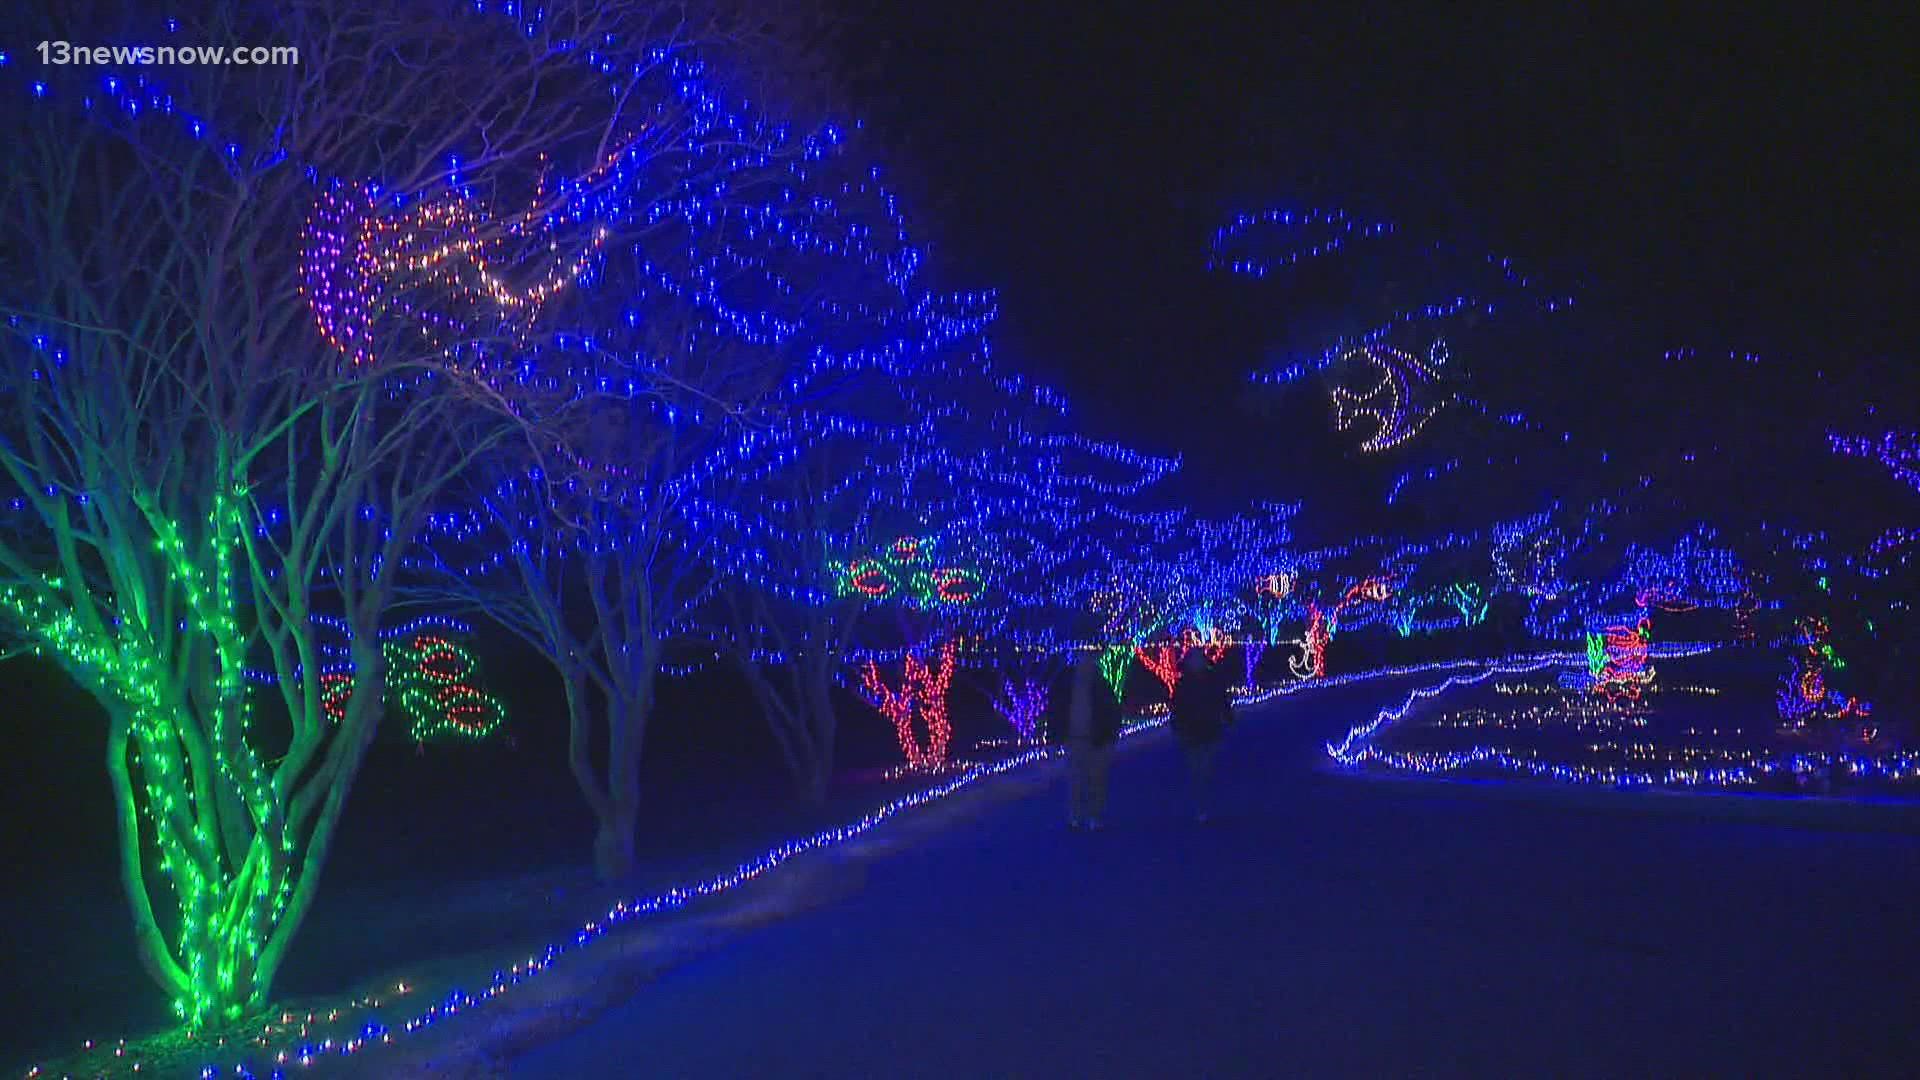 The Million Bulb Walk is back in the running for Best Botanical Garden Holiday Lights.